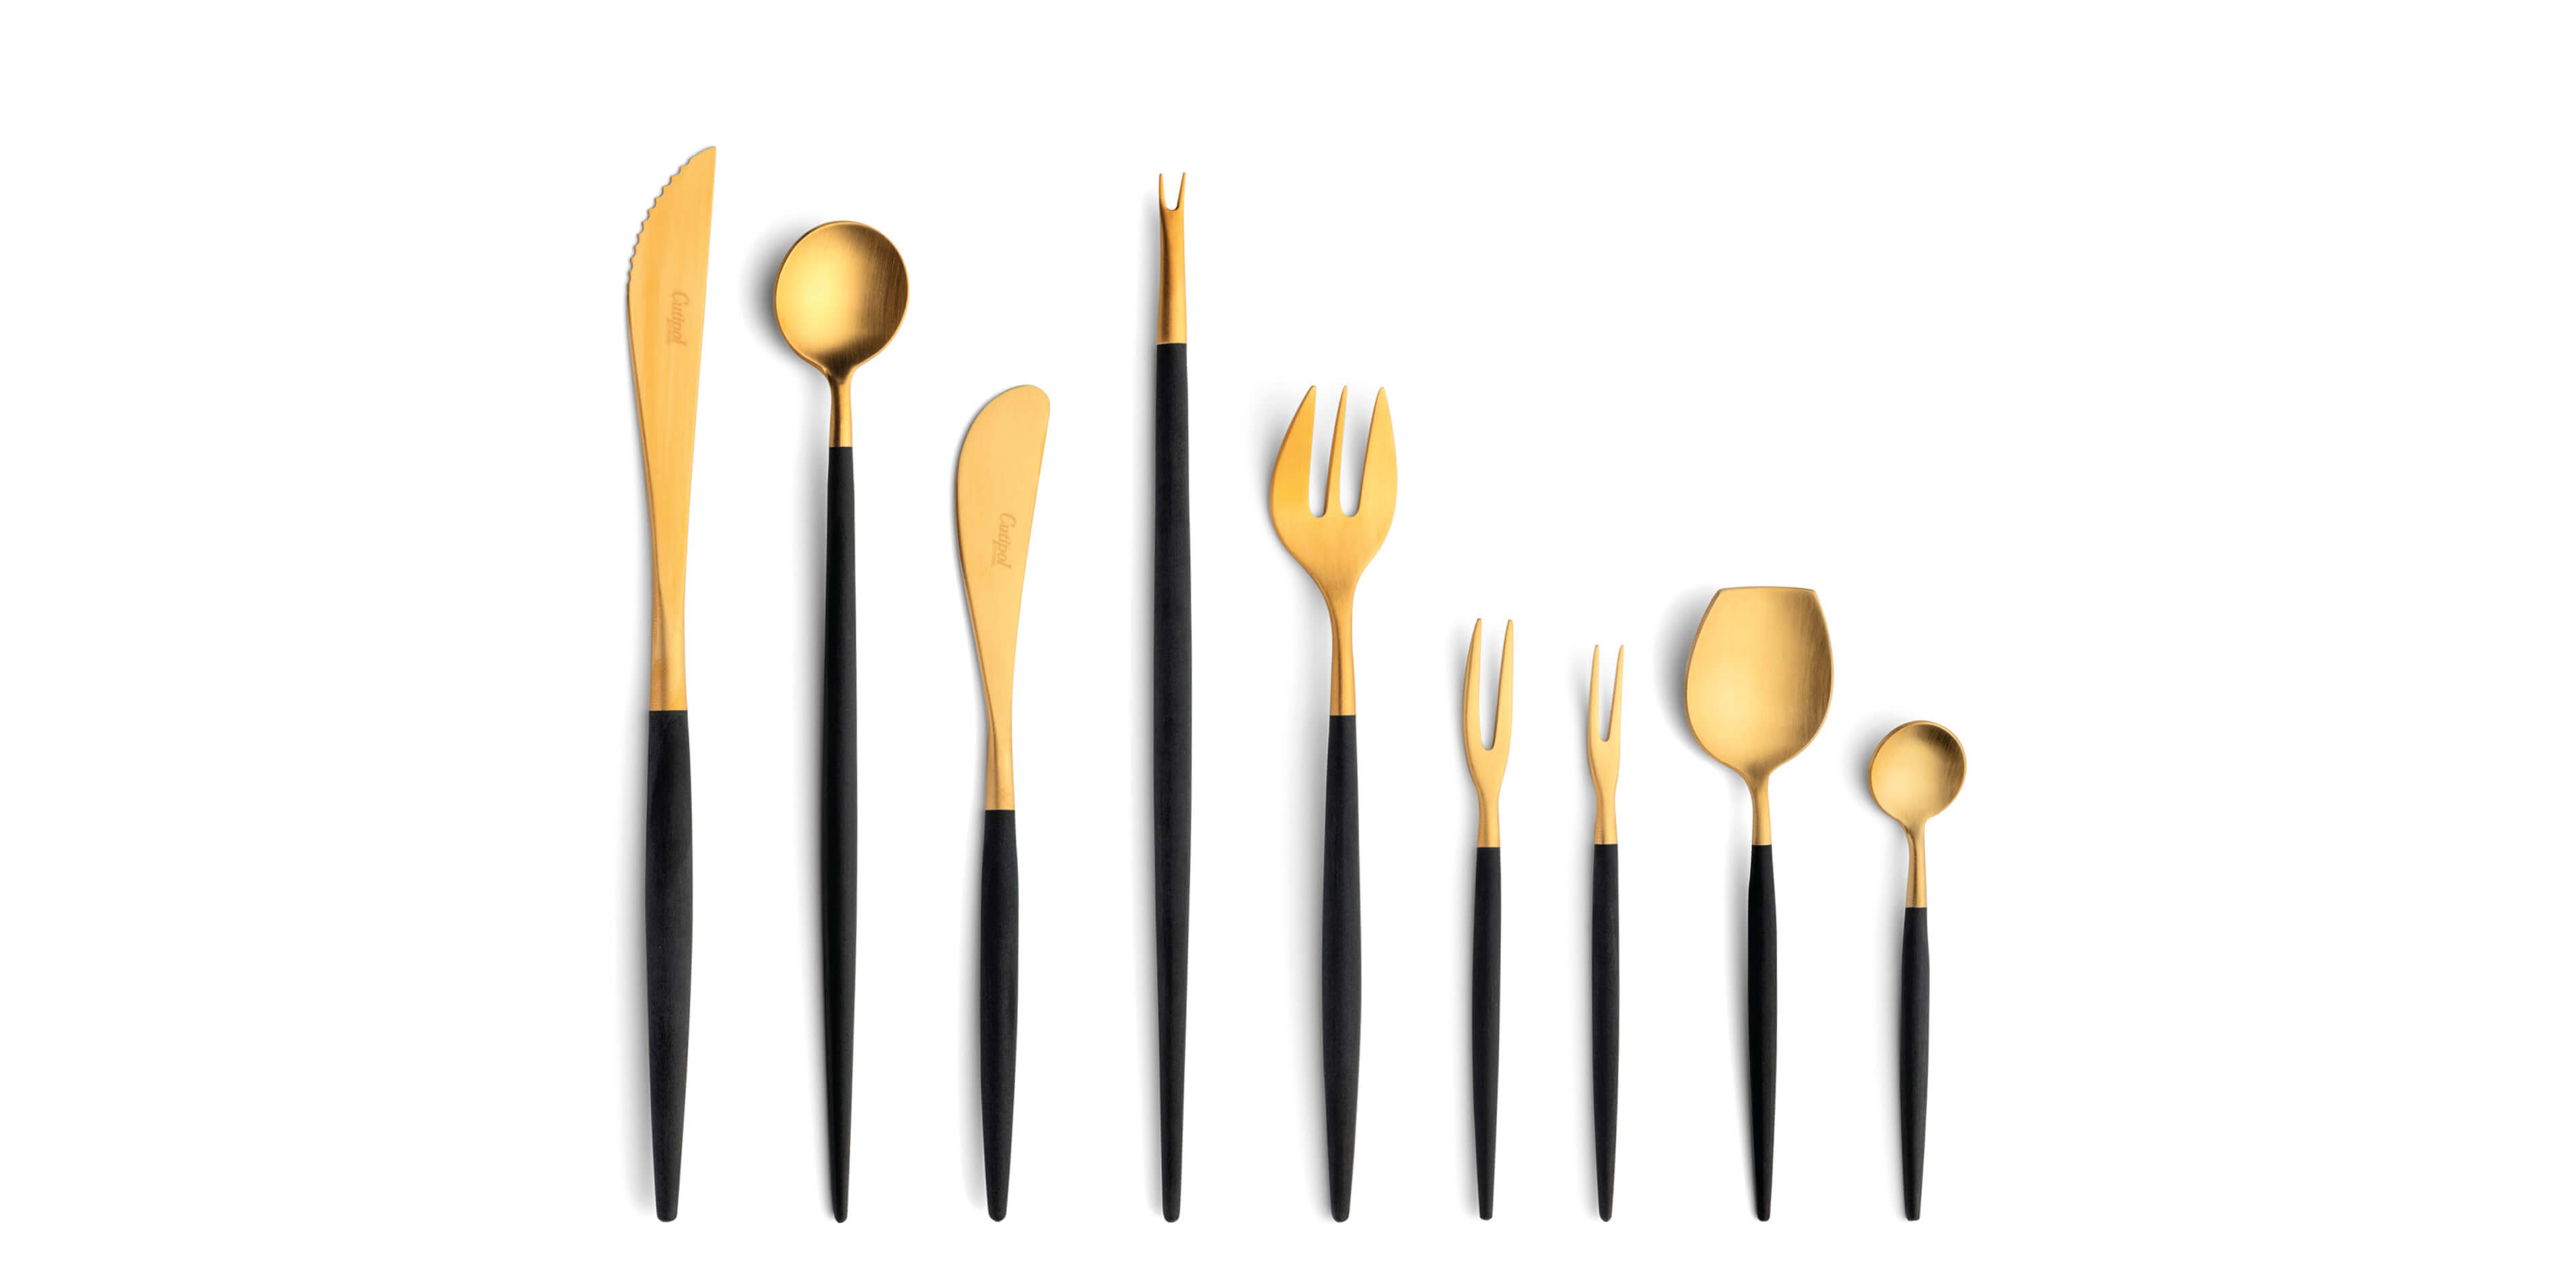 Cutipol Cutlery Goa Gold with steak knife, long drink spoon, butter knife, lobster fork, oyster fork, Japanese fork, snail fork, sugar spoon and moka spoon